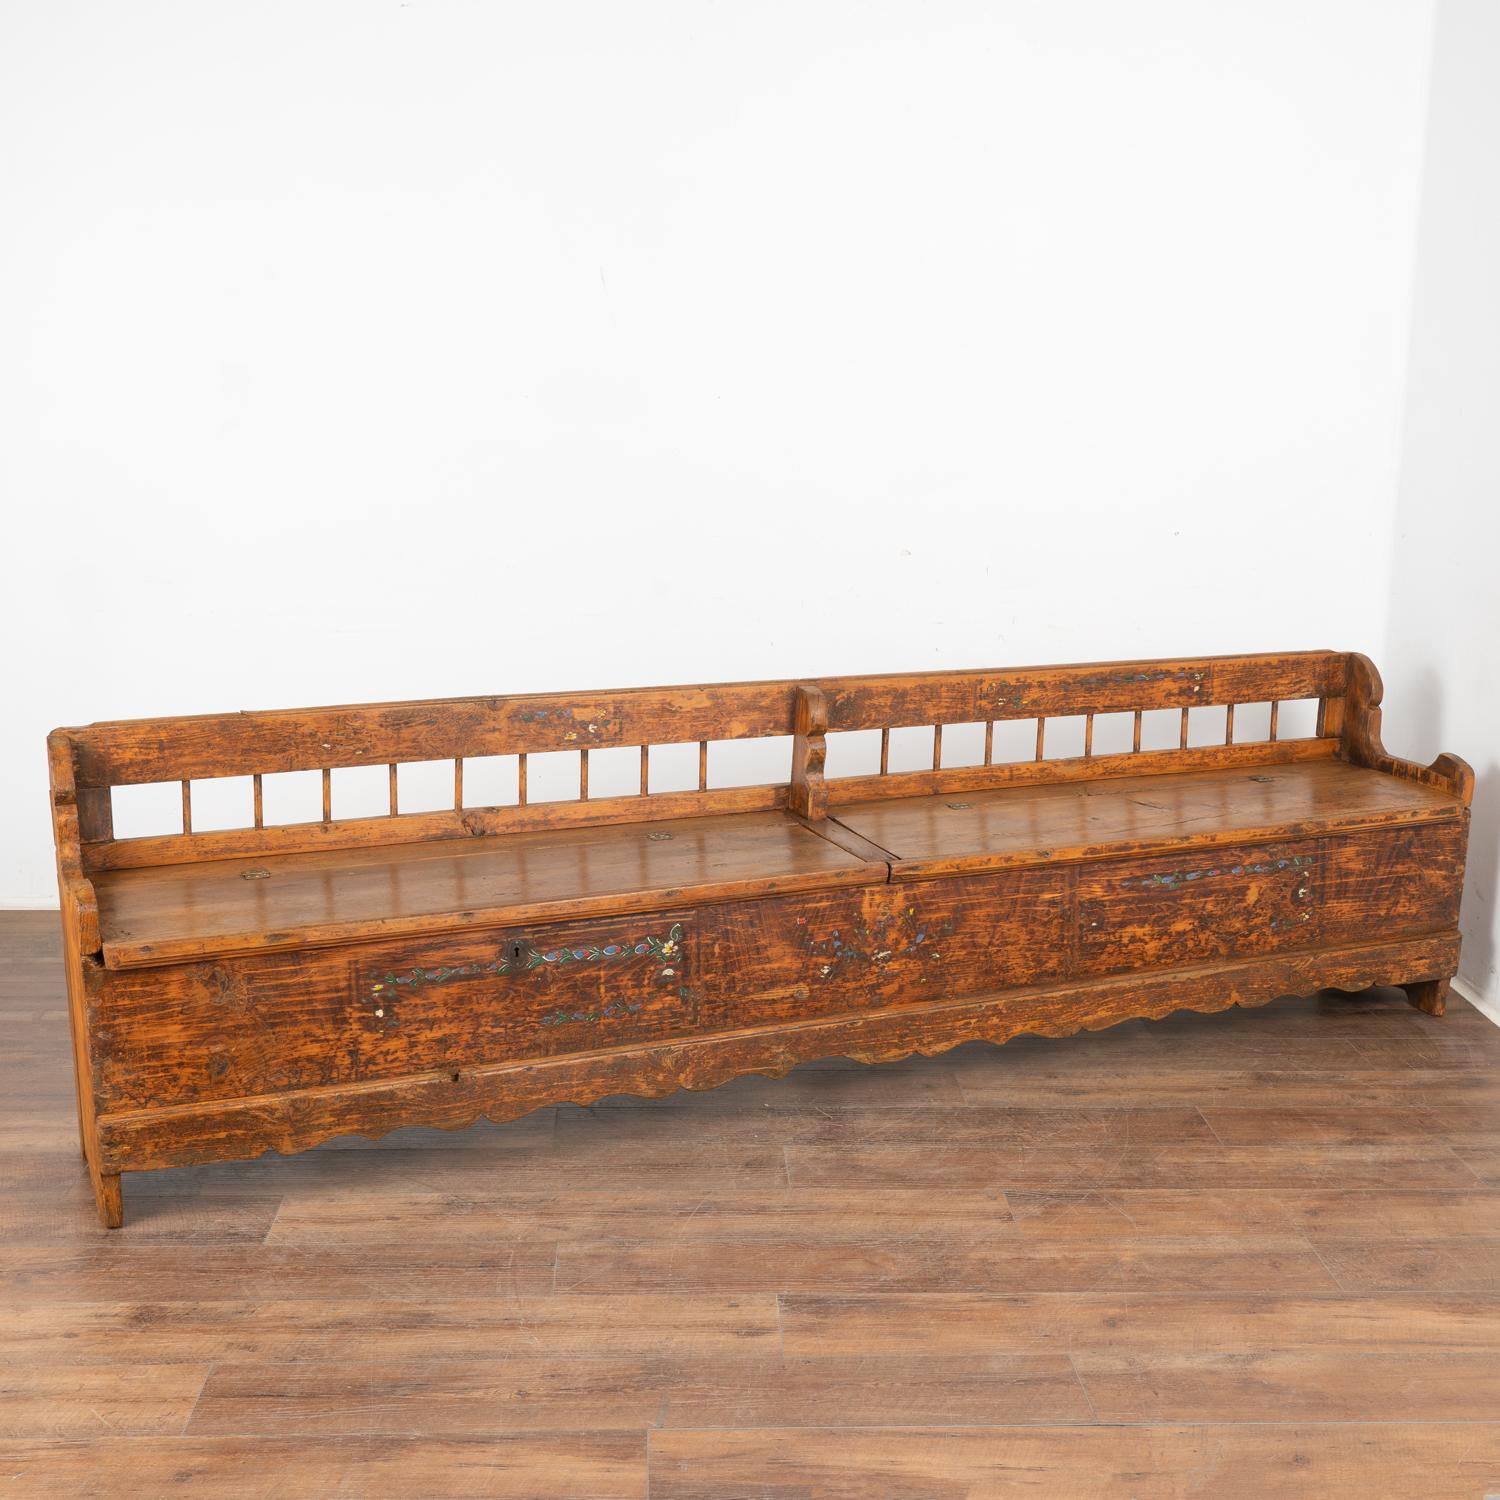 Antique hand painted bench with divided storage at over 9' long .
Traditional Eastern European folk art hand-painting reveals faded flourishes/flower borders along front against brown painted background. 
Two bench seats open to reveal divided